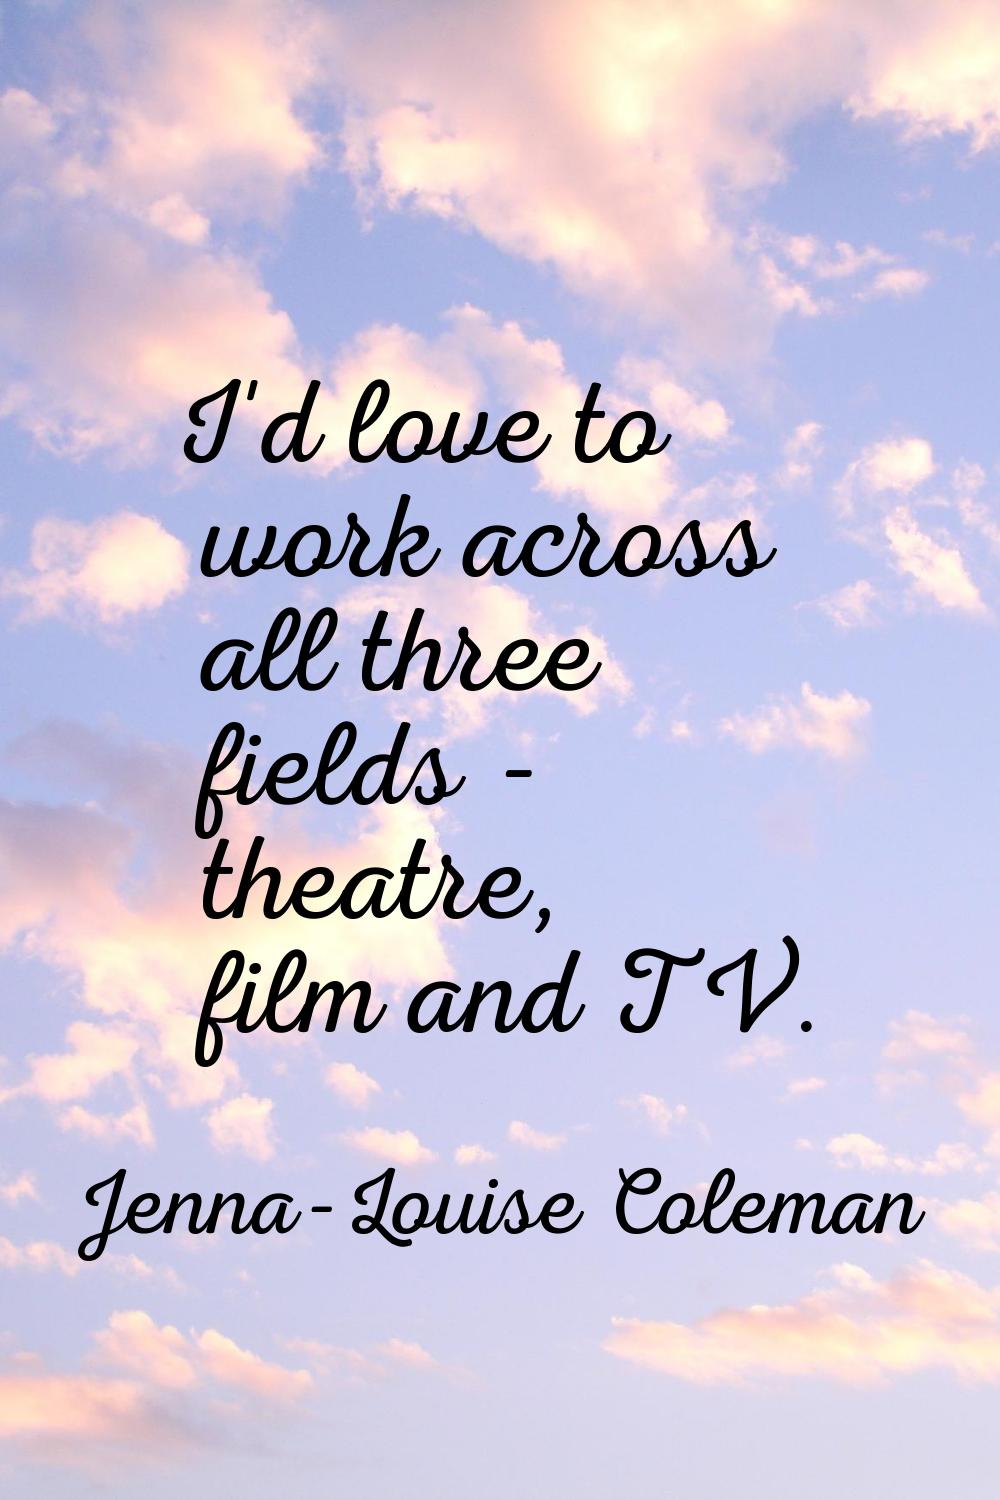 I'd love to work across all three fields - theatre, film and TV.